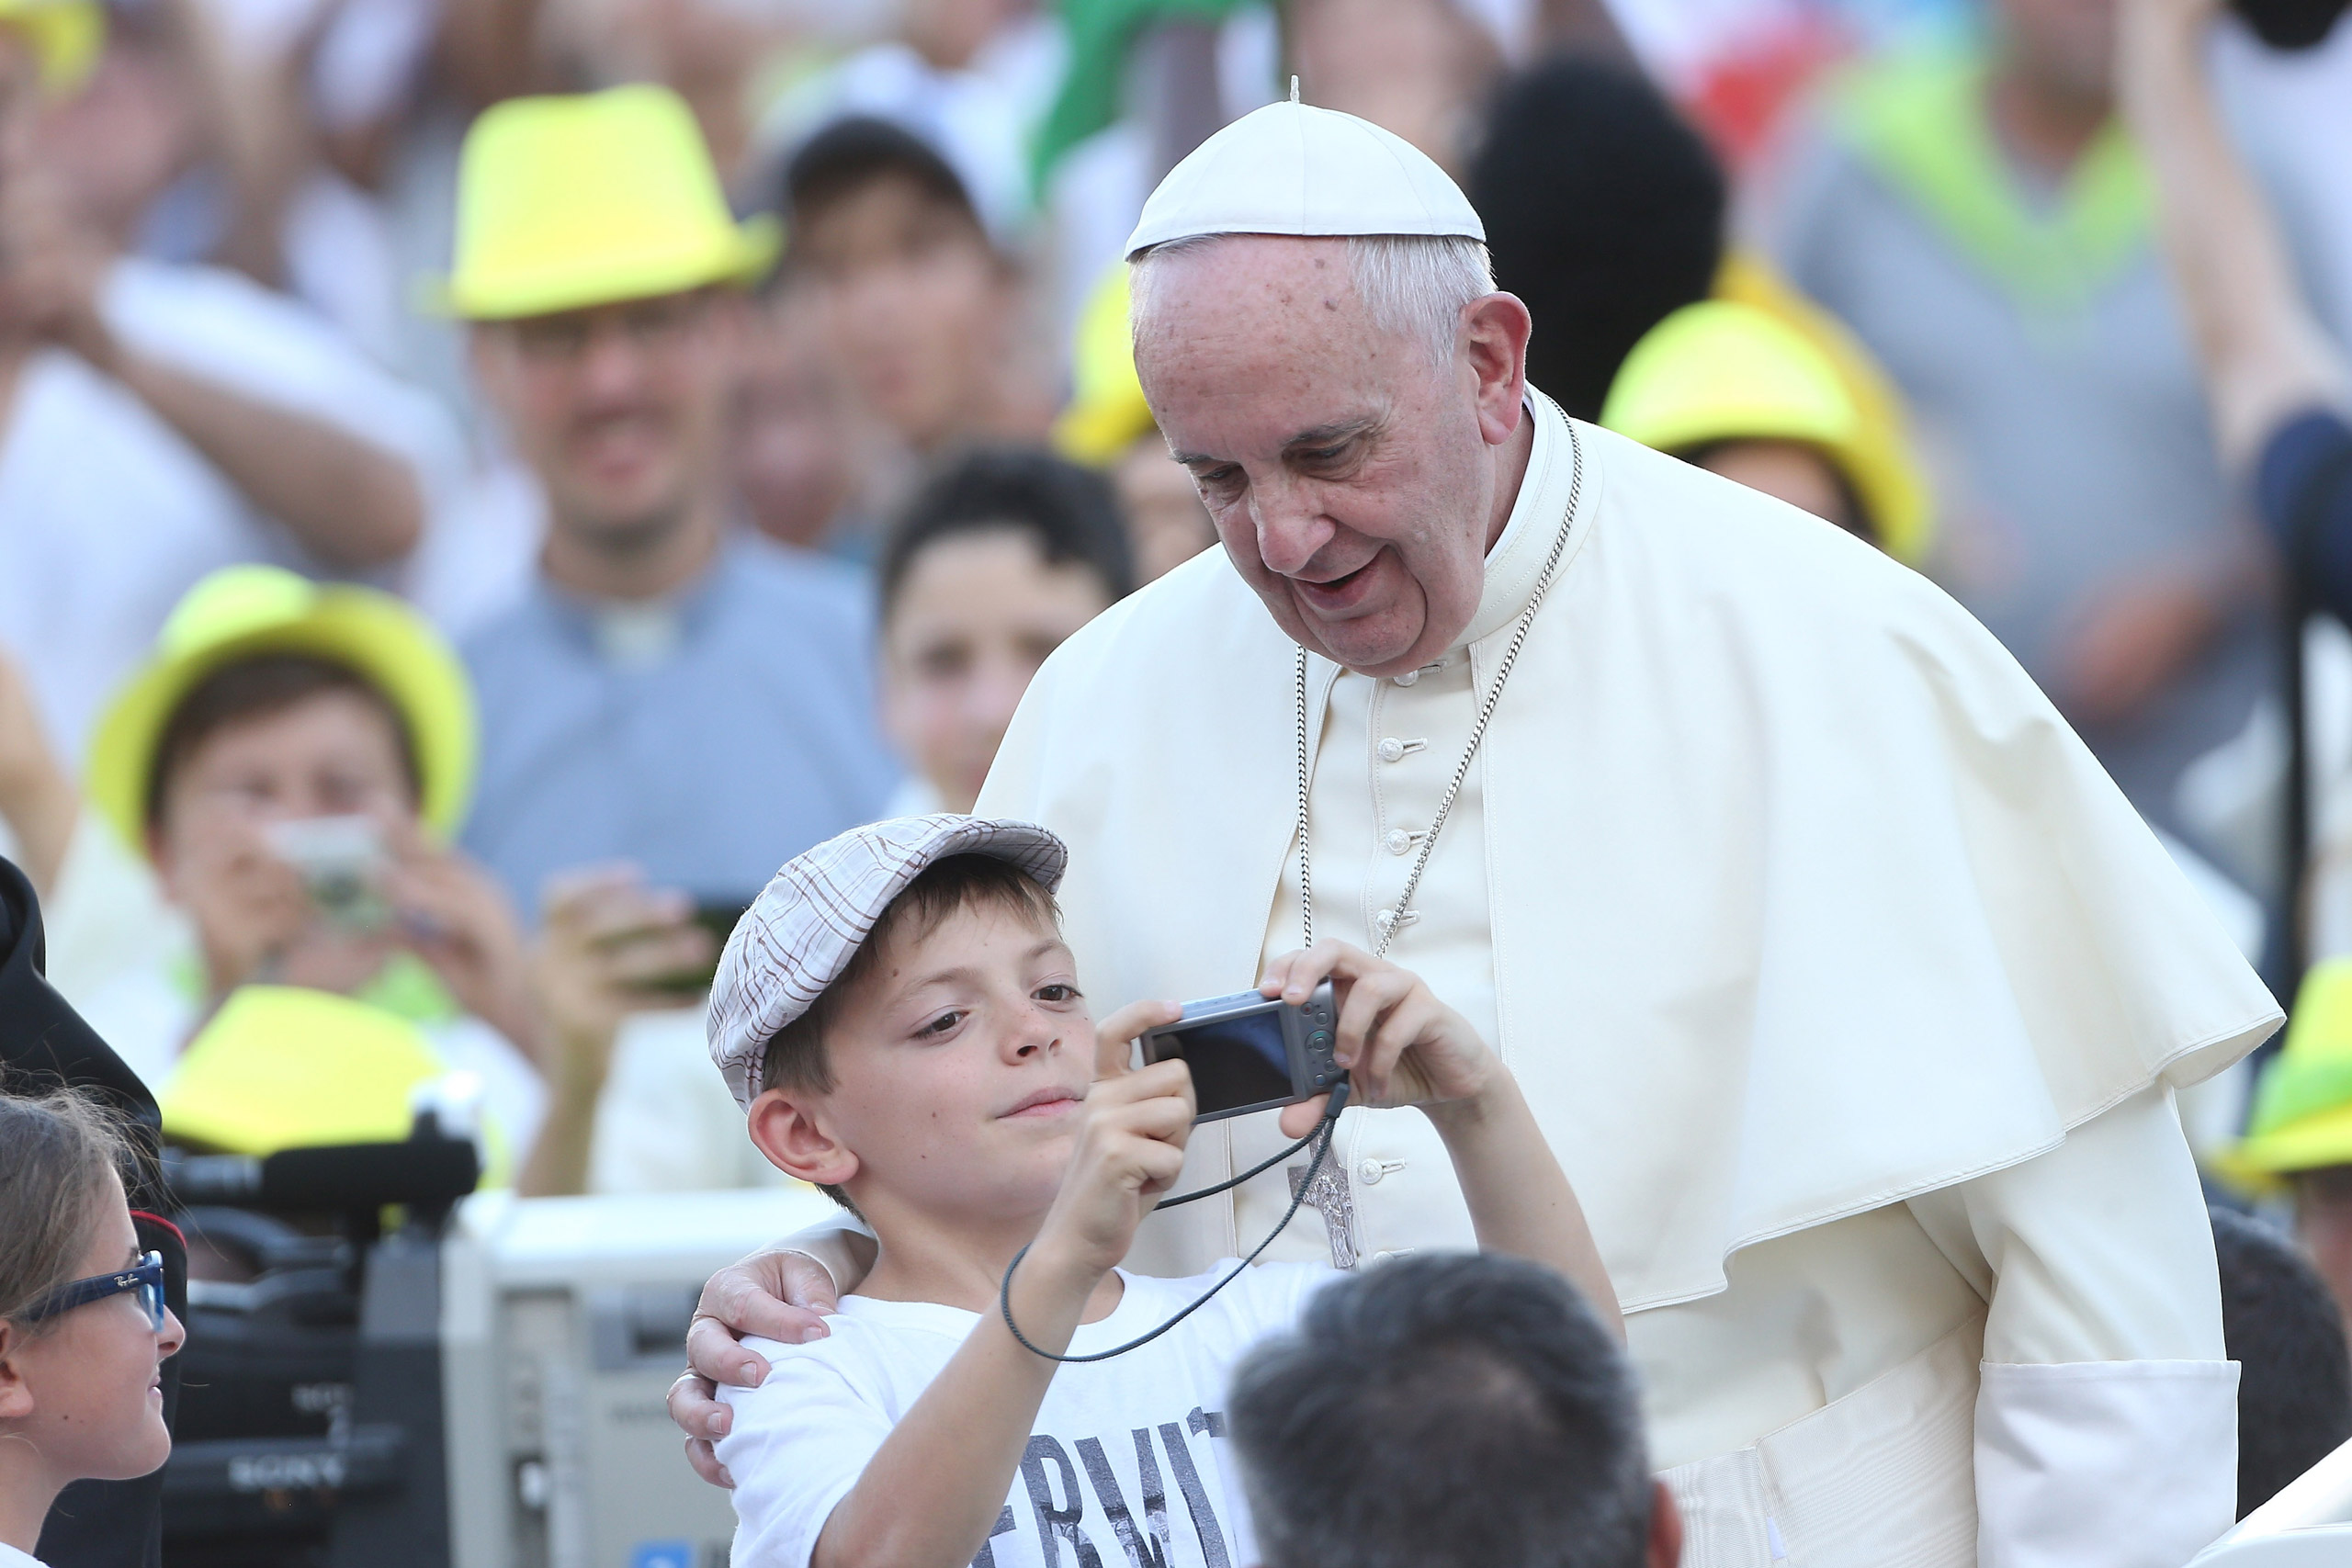 VATICAN CITY, VATICAN - AUGUST 04:  Pope Francis poses for a selfie as he arrives in St. Peter's Square for an audience with thousands of altar servers from around Europe on August 4, 2015 in Vatican City, Vatican. The encounter was part of the ninth International Pilgrimage of Acolytes and Altar Servers.  (Photo by Franco Origlia/Getty Images)